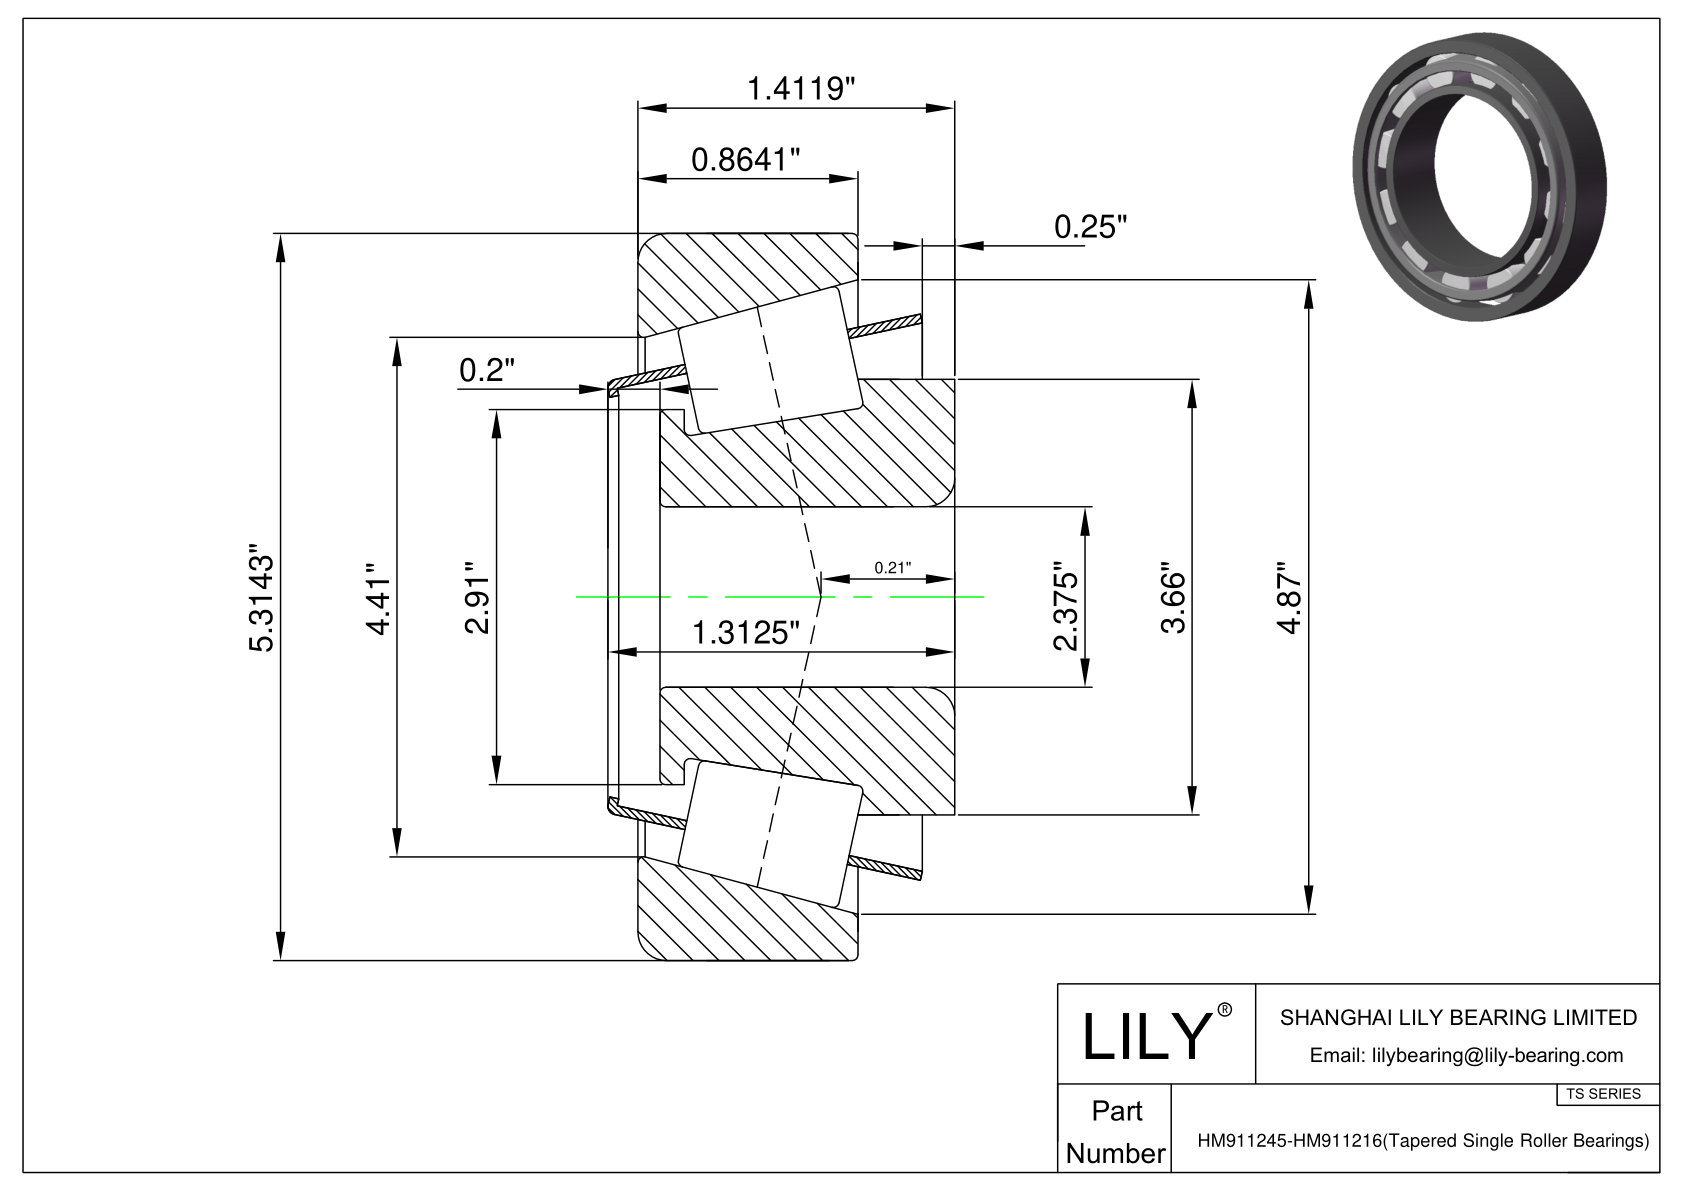 HM911245-HM911216 TS (Tapered Single Roller Bearings) (Imperial) cad drawing